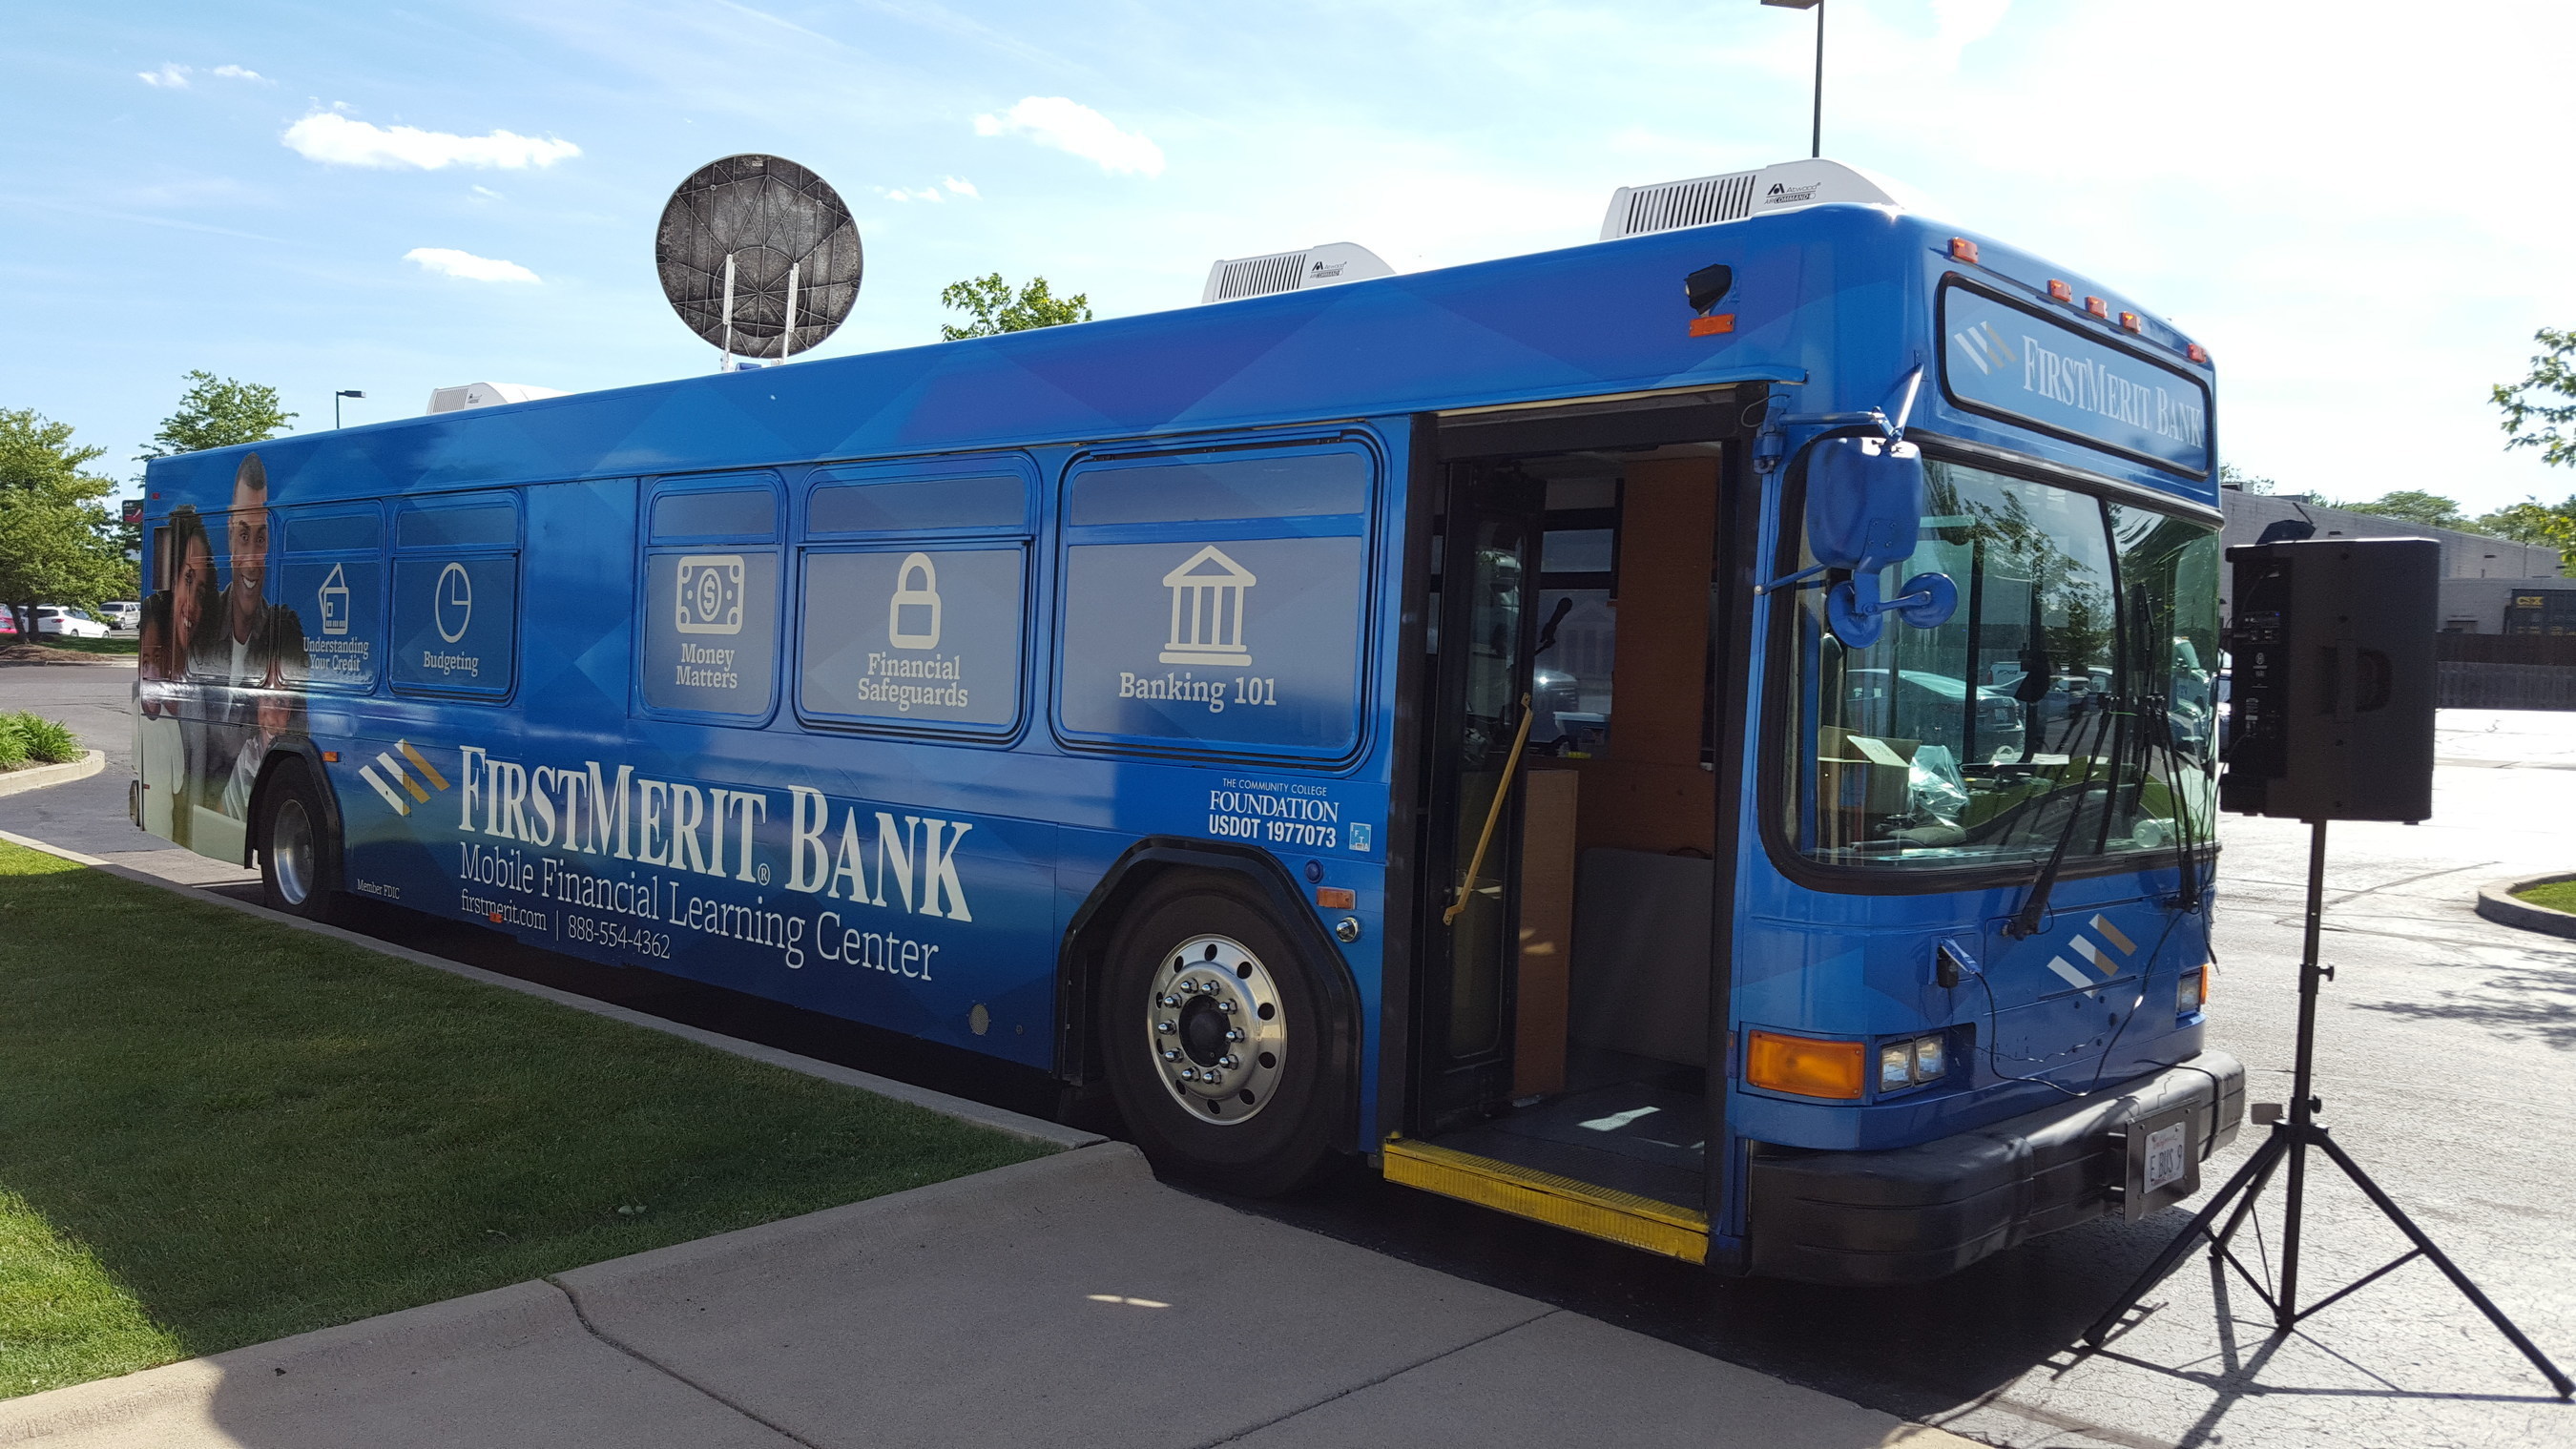 FirstMerit's Mobile Financial Learning Center is bringing financial tools and information to neighborhoods across the Midwest this summer.